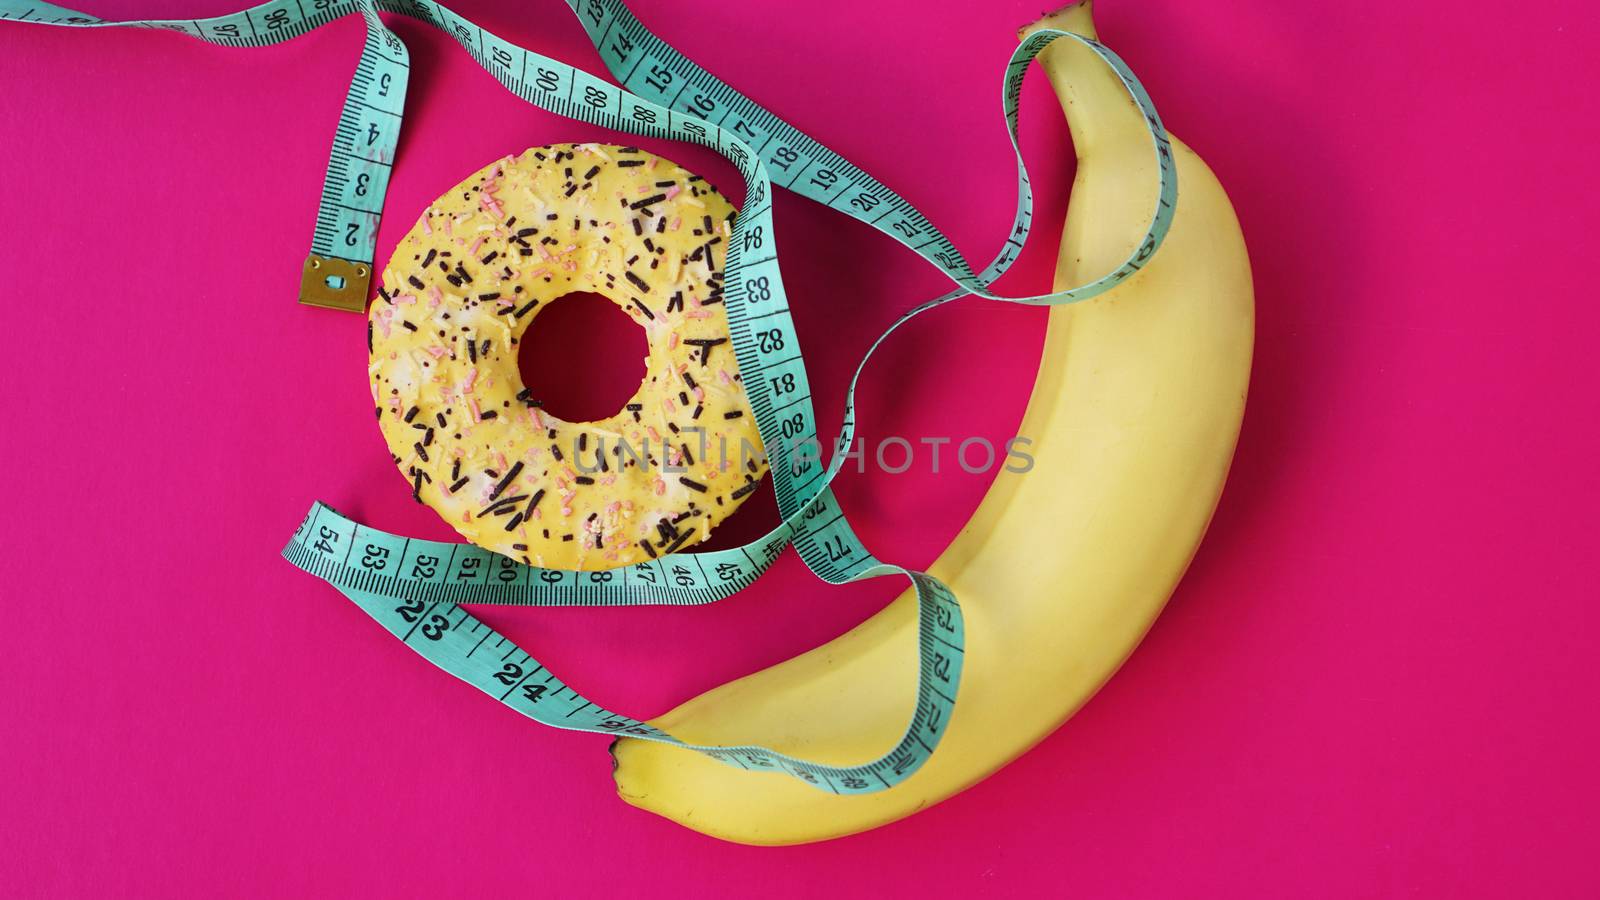 Two types of food, healthy and unhealthy, banana and donut, diet and obesity, health concept on a pink background